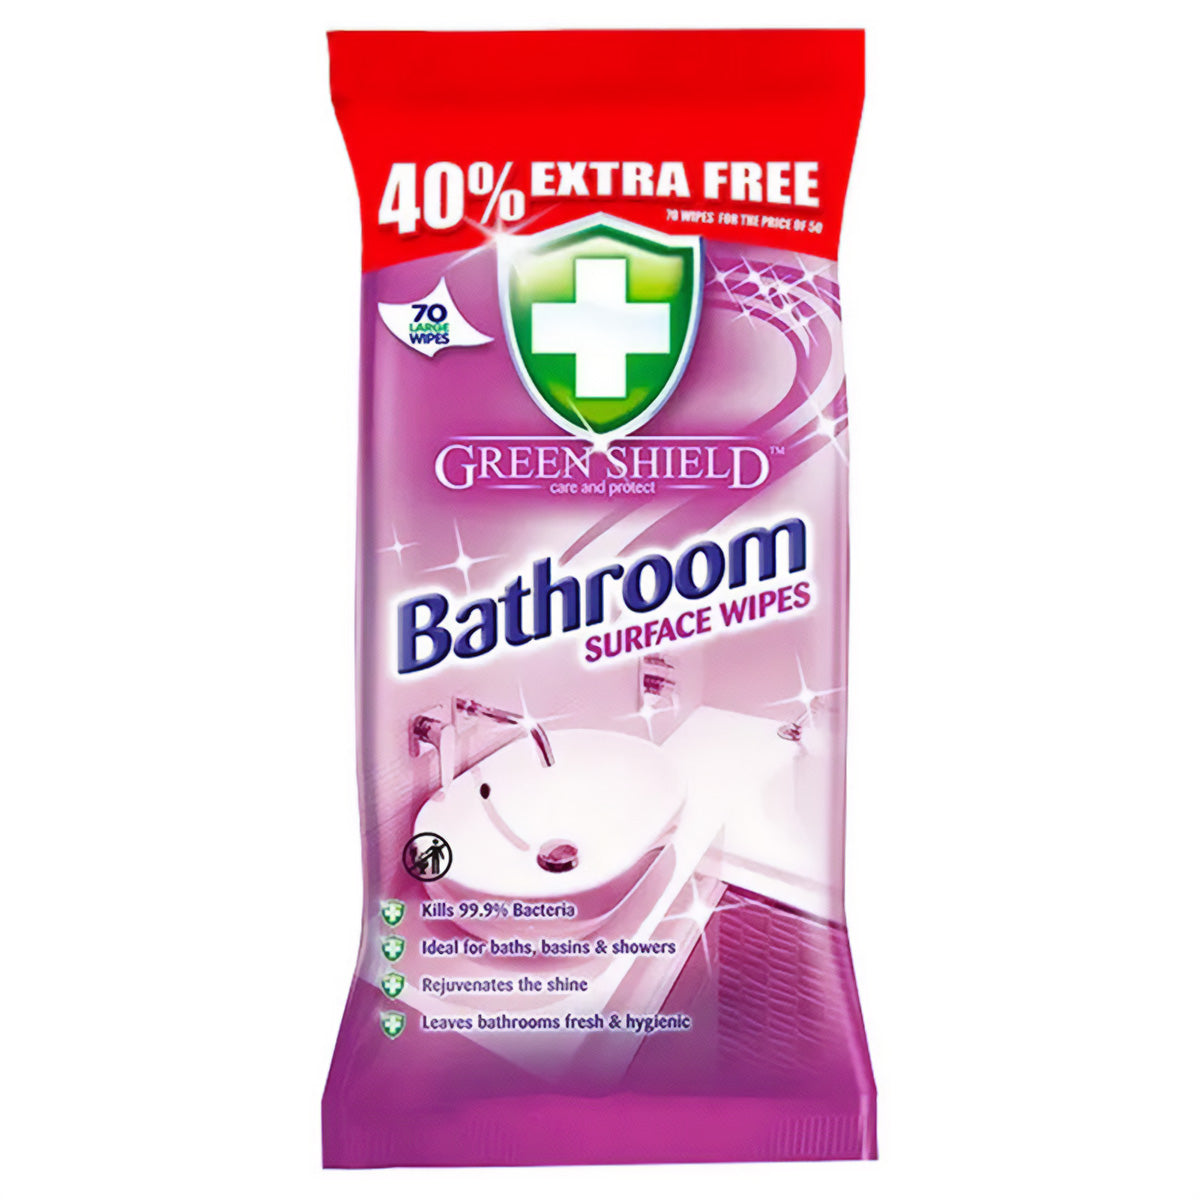 A package of Green Shield - Bathroom Surface Wipes - 70 Wipes.